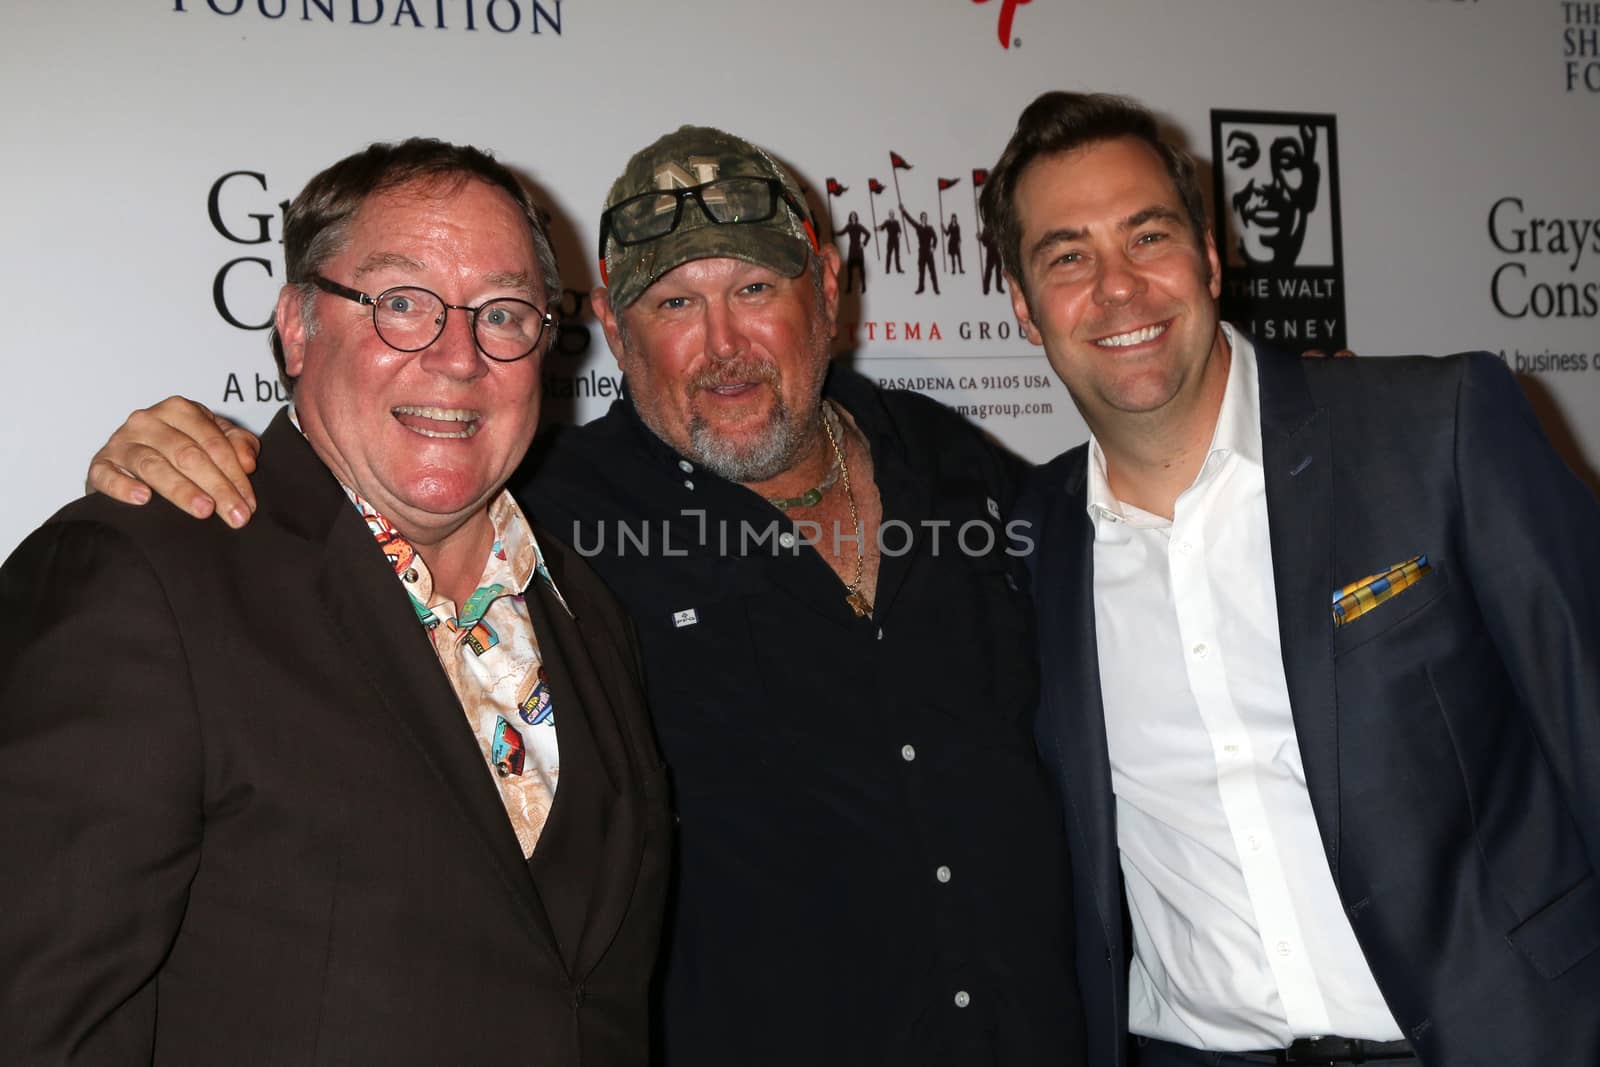 John Lasseter, Daniel Whitney, aka Larry the Cable Guy, Brian Fee
at the The Walt Disney Family Museum 2nd Annual Fundraising Gala, Disneys Grand Californian Hotel & Spa, Anaheim, CA 11-01-16/ImageCollect by ImageCollect